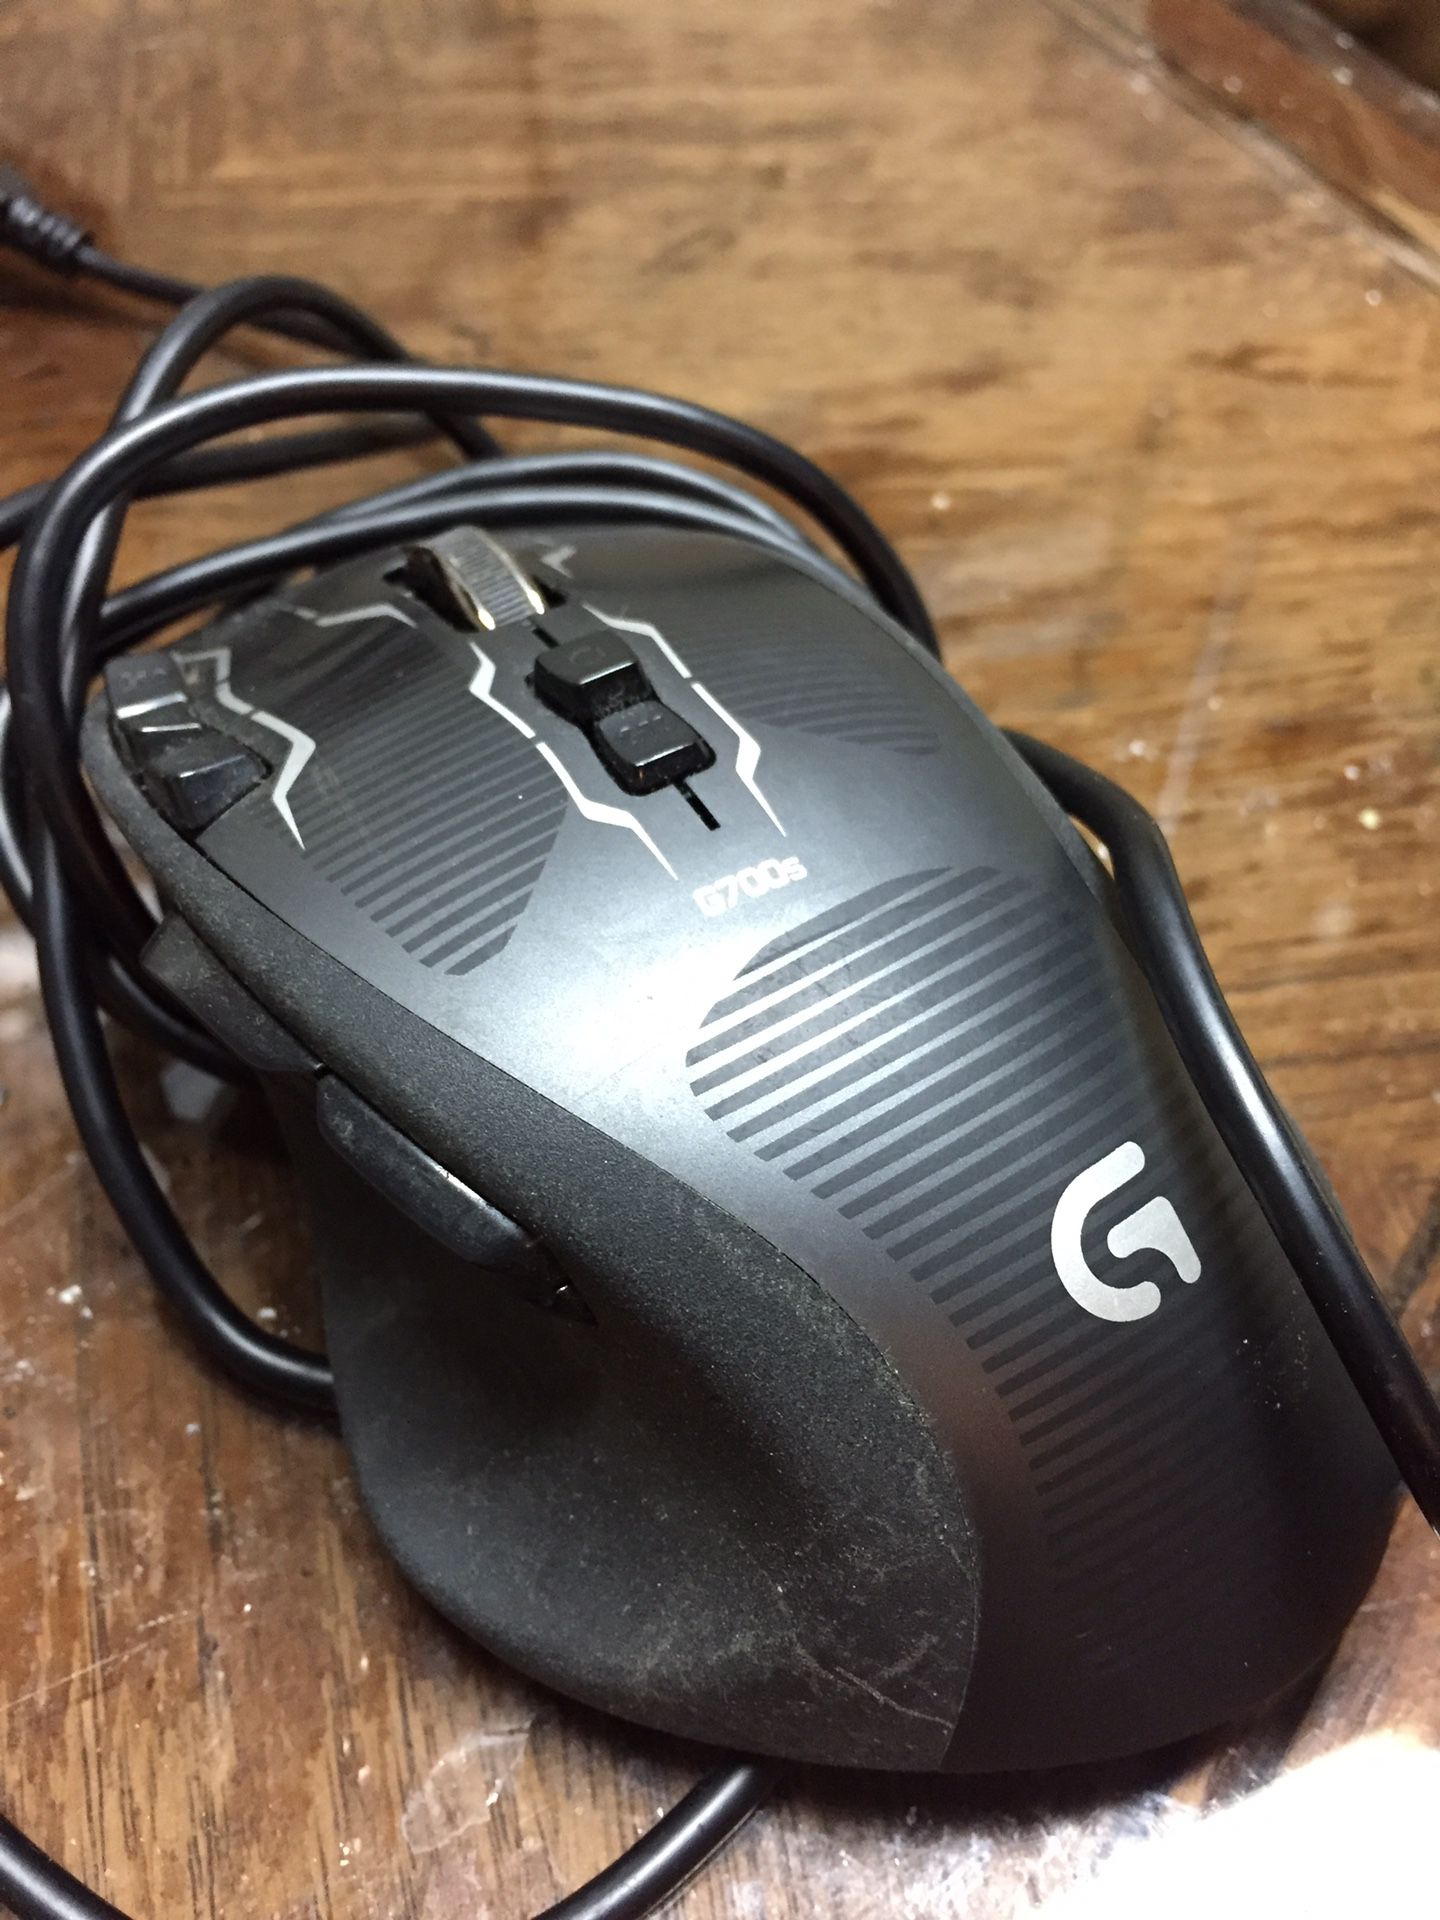 Logistic Gaming mouse